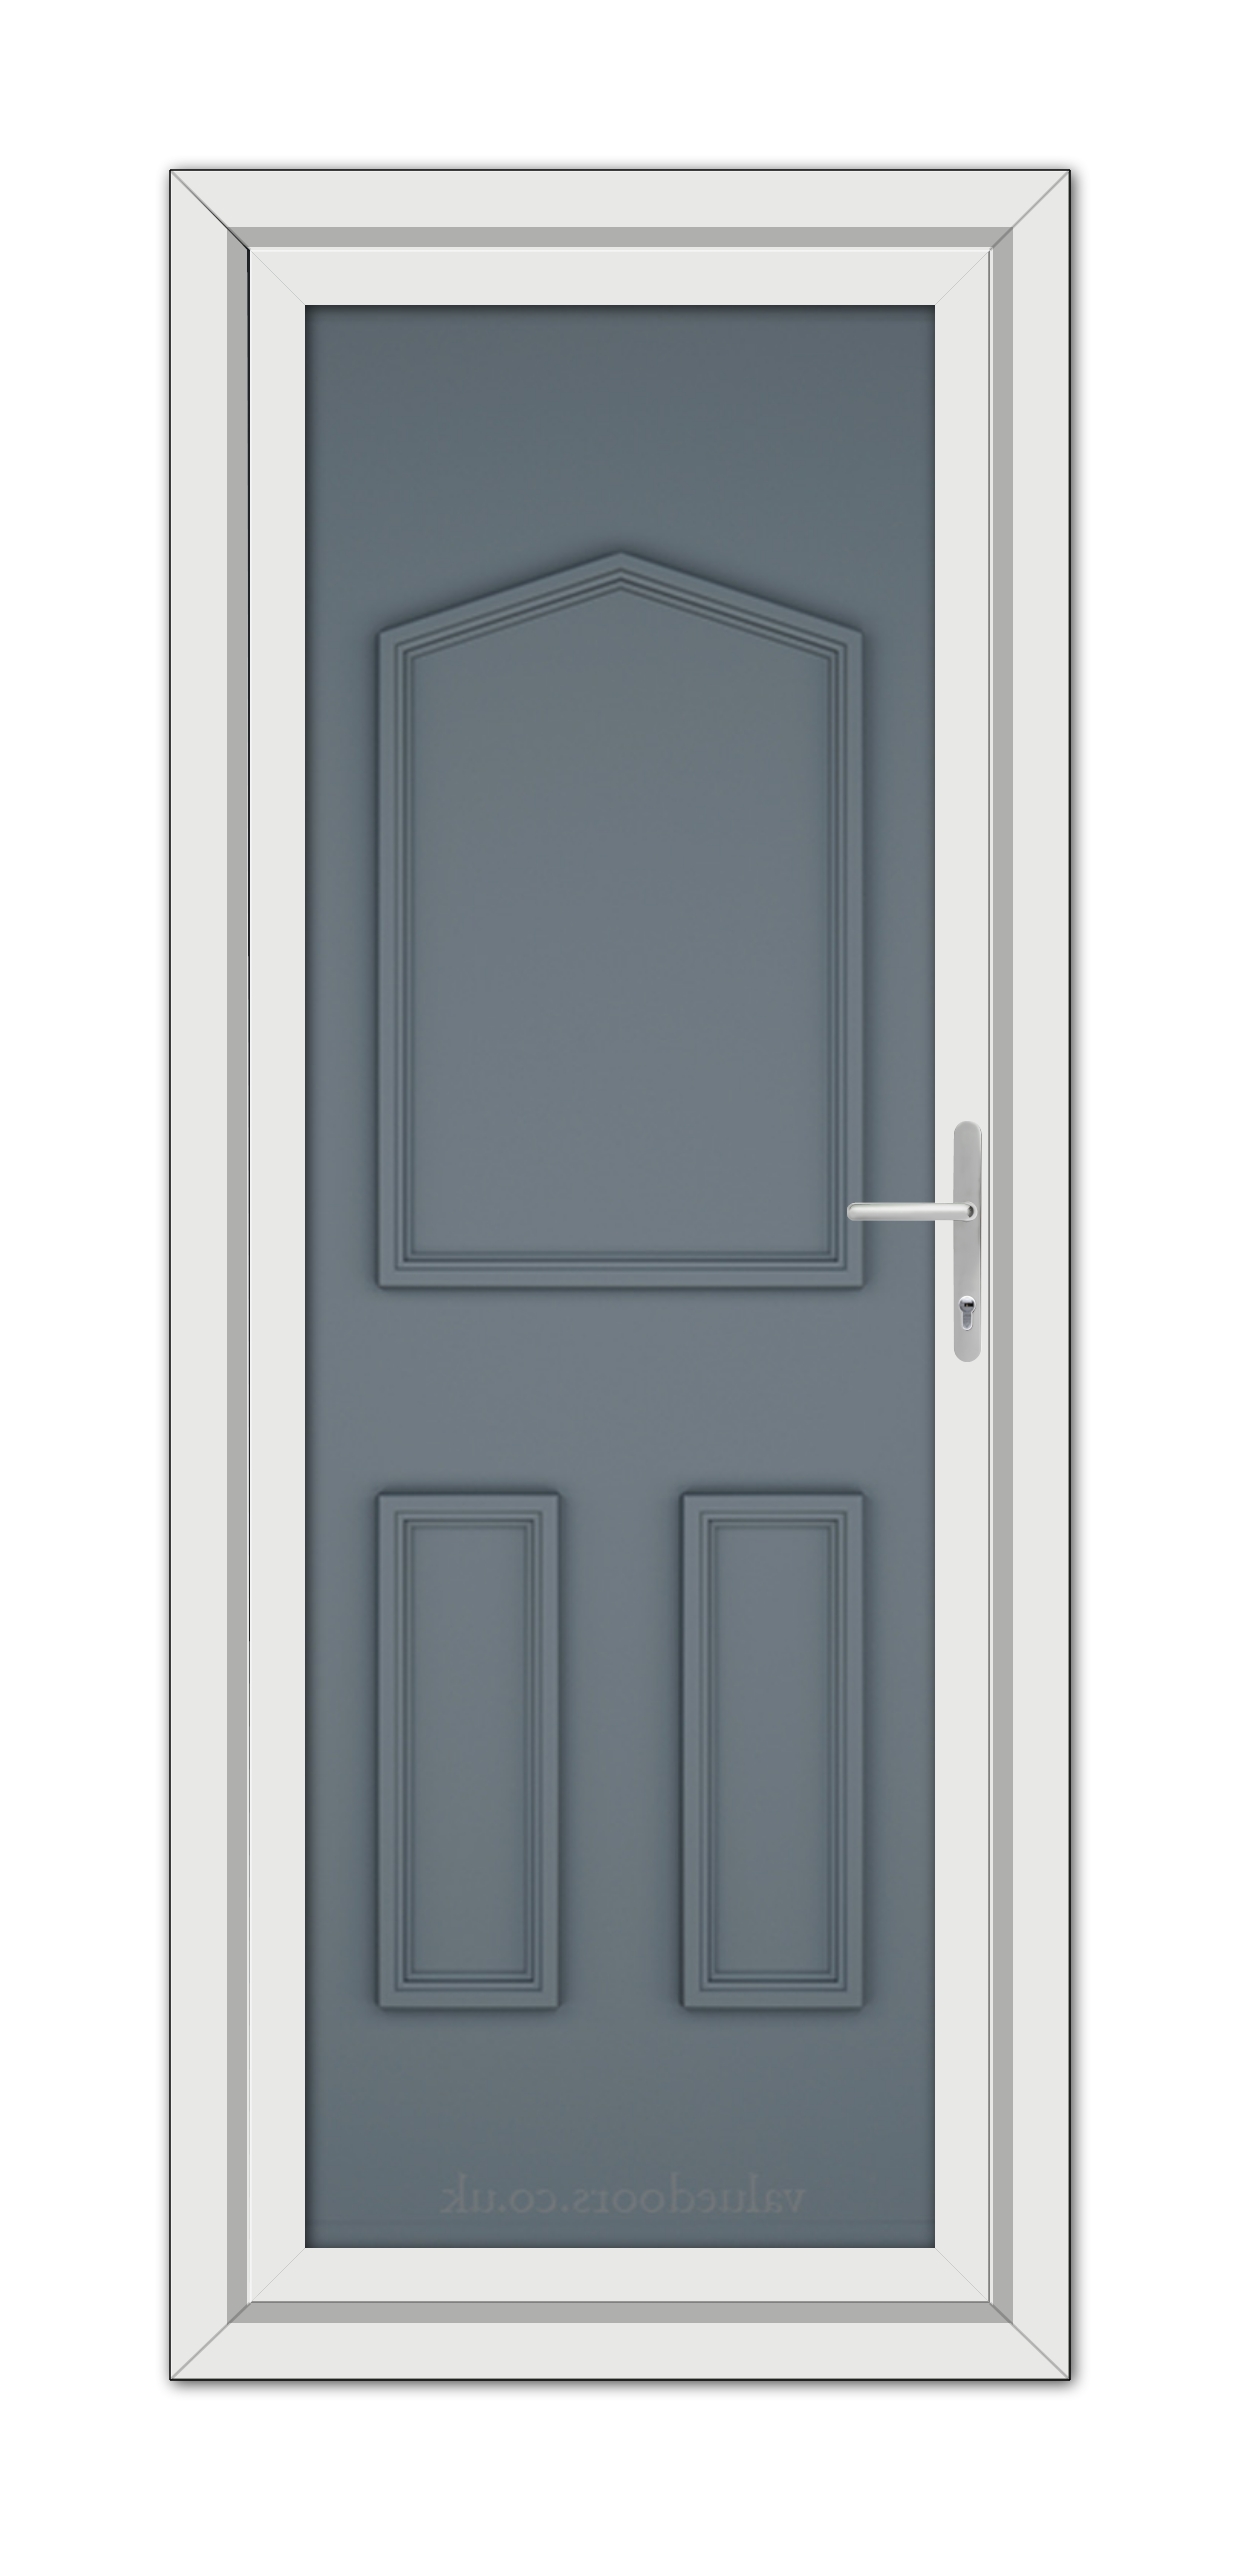 A Slate Grey Oxford Solid uPVC door with a white frame.